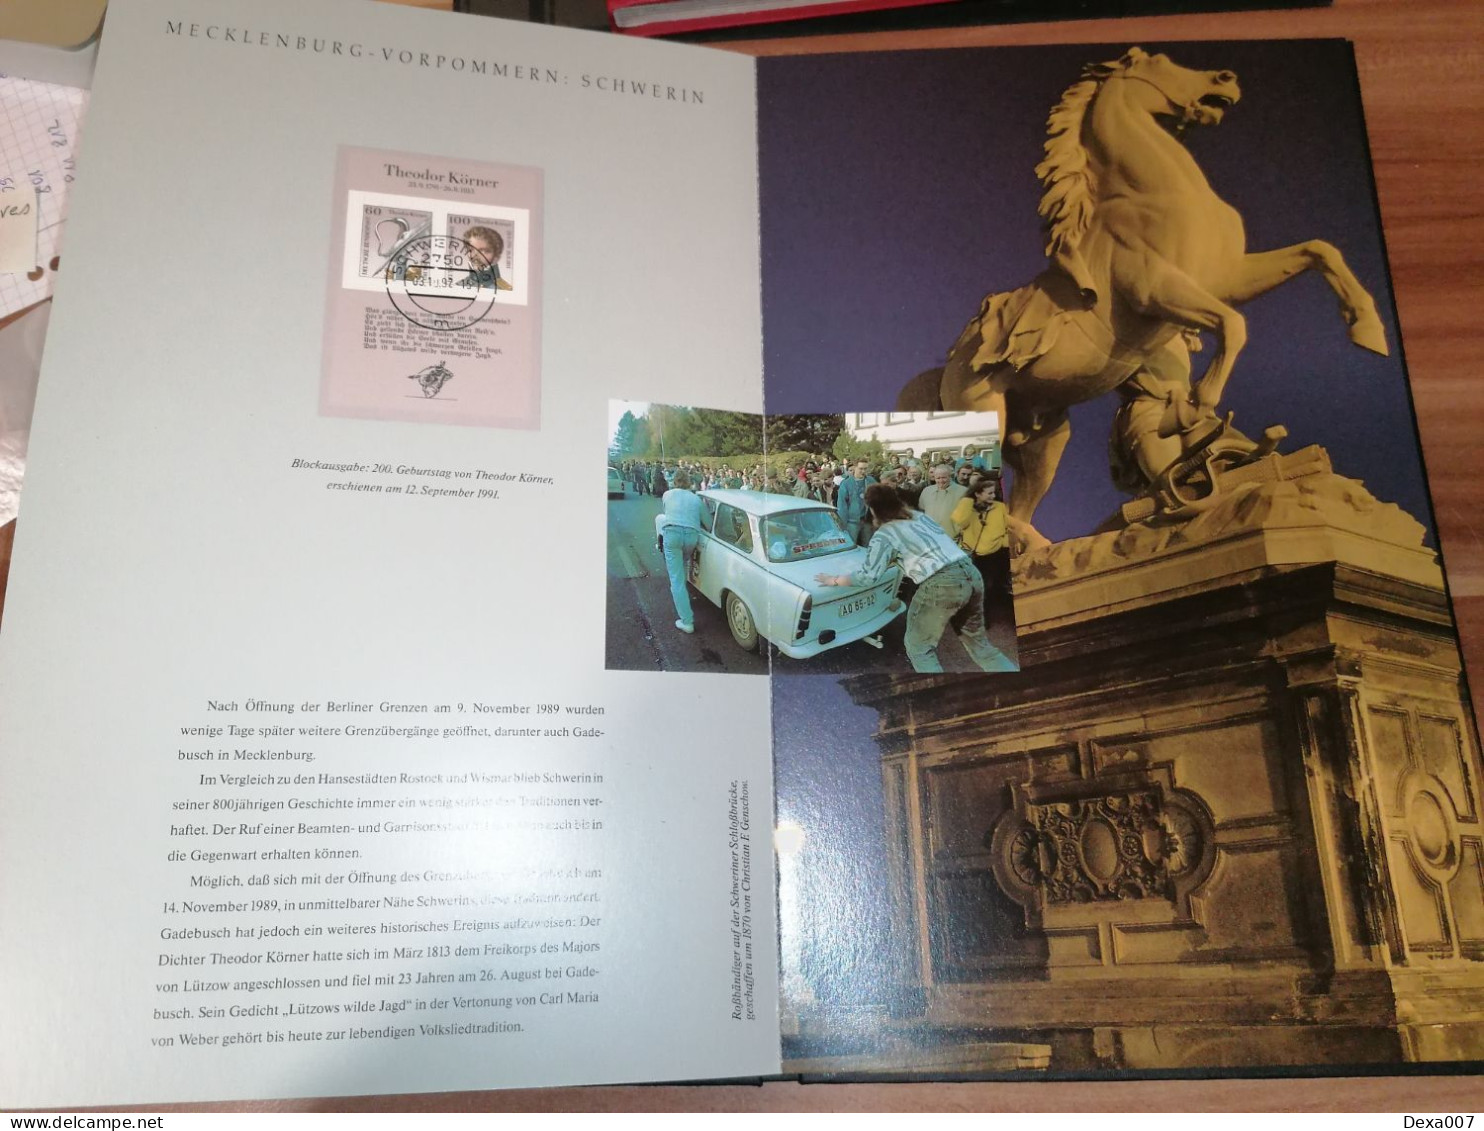 Illustrated collection by German Post hardcover book exclusive cancelations